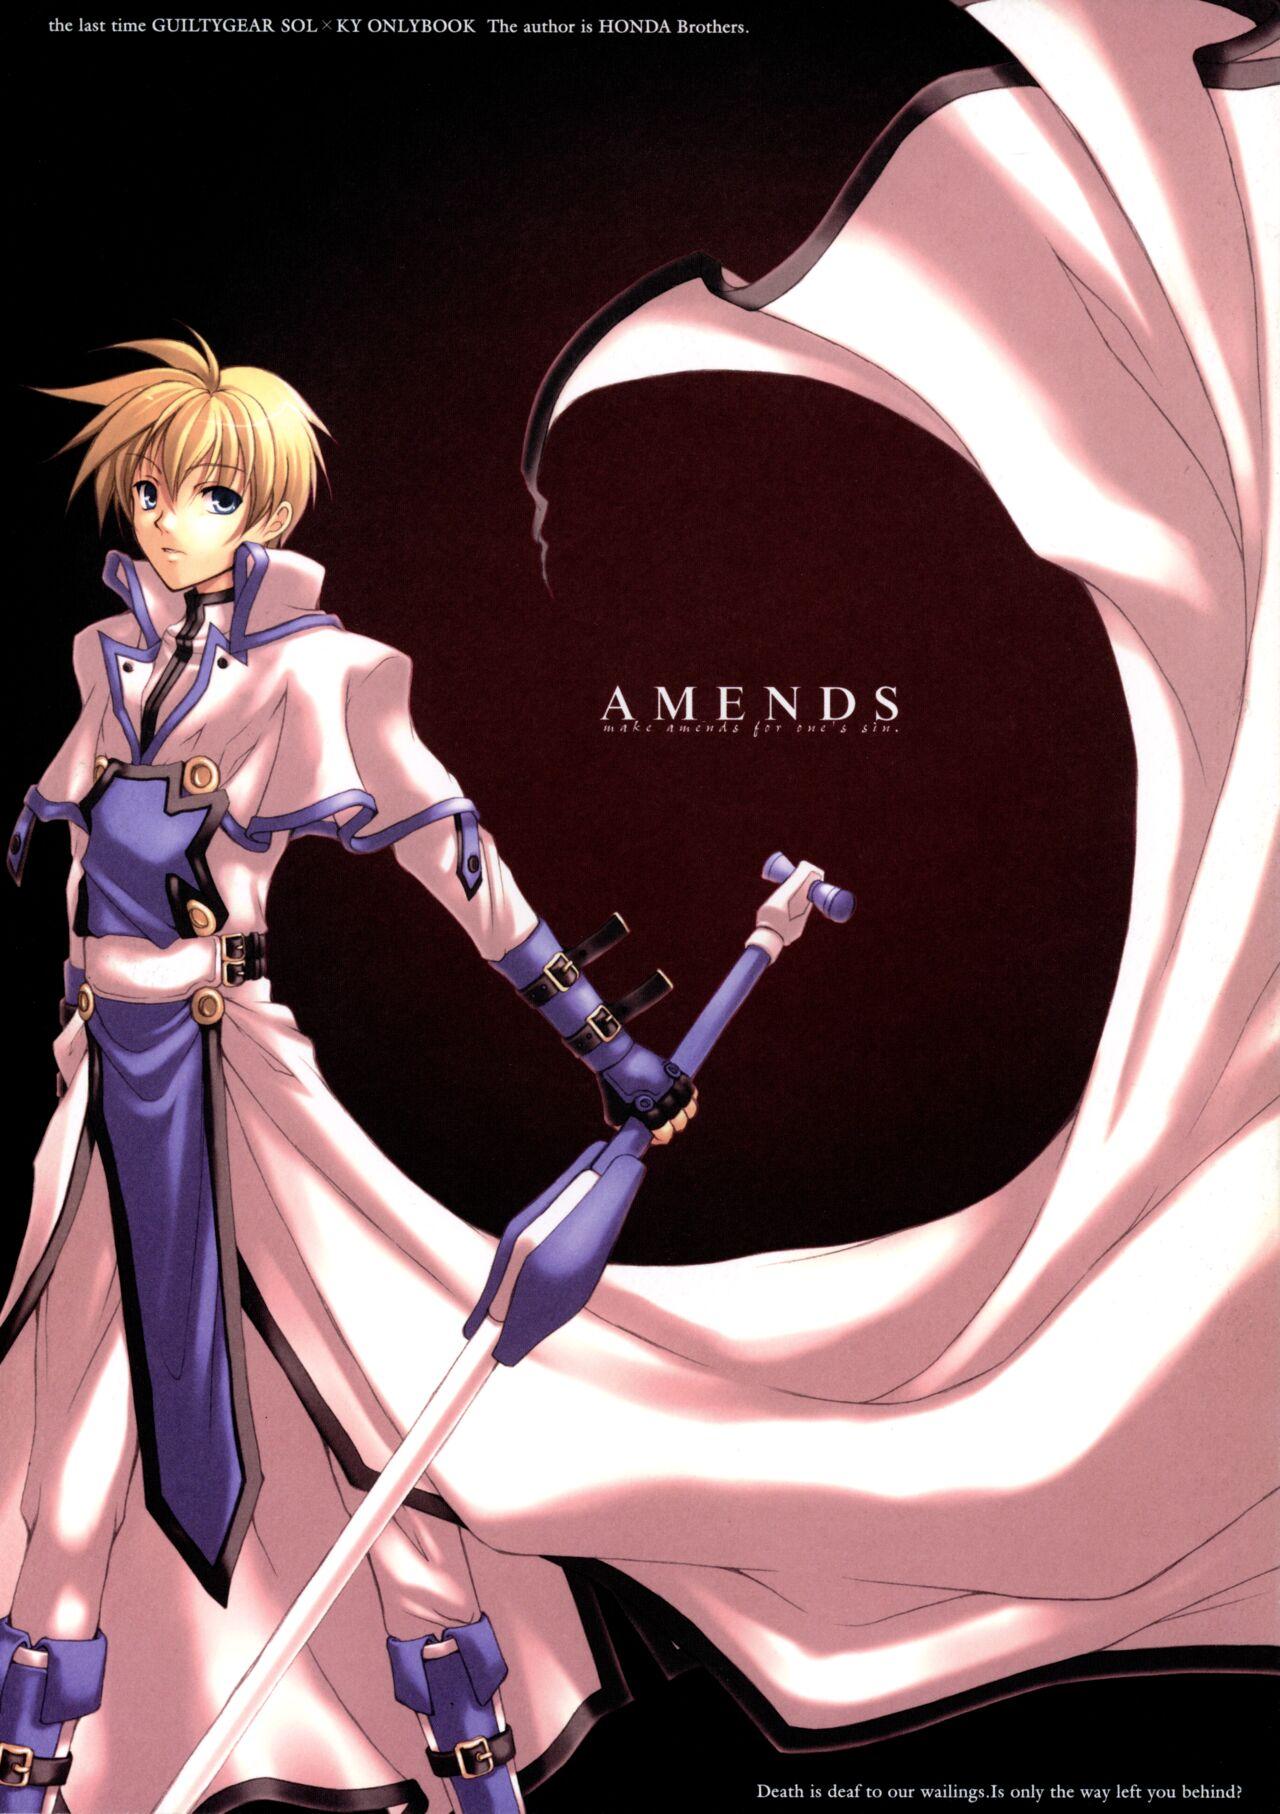 AMENDS - make amends for one's sin. 0